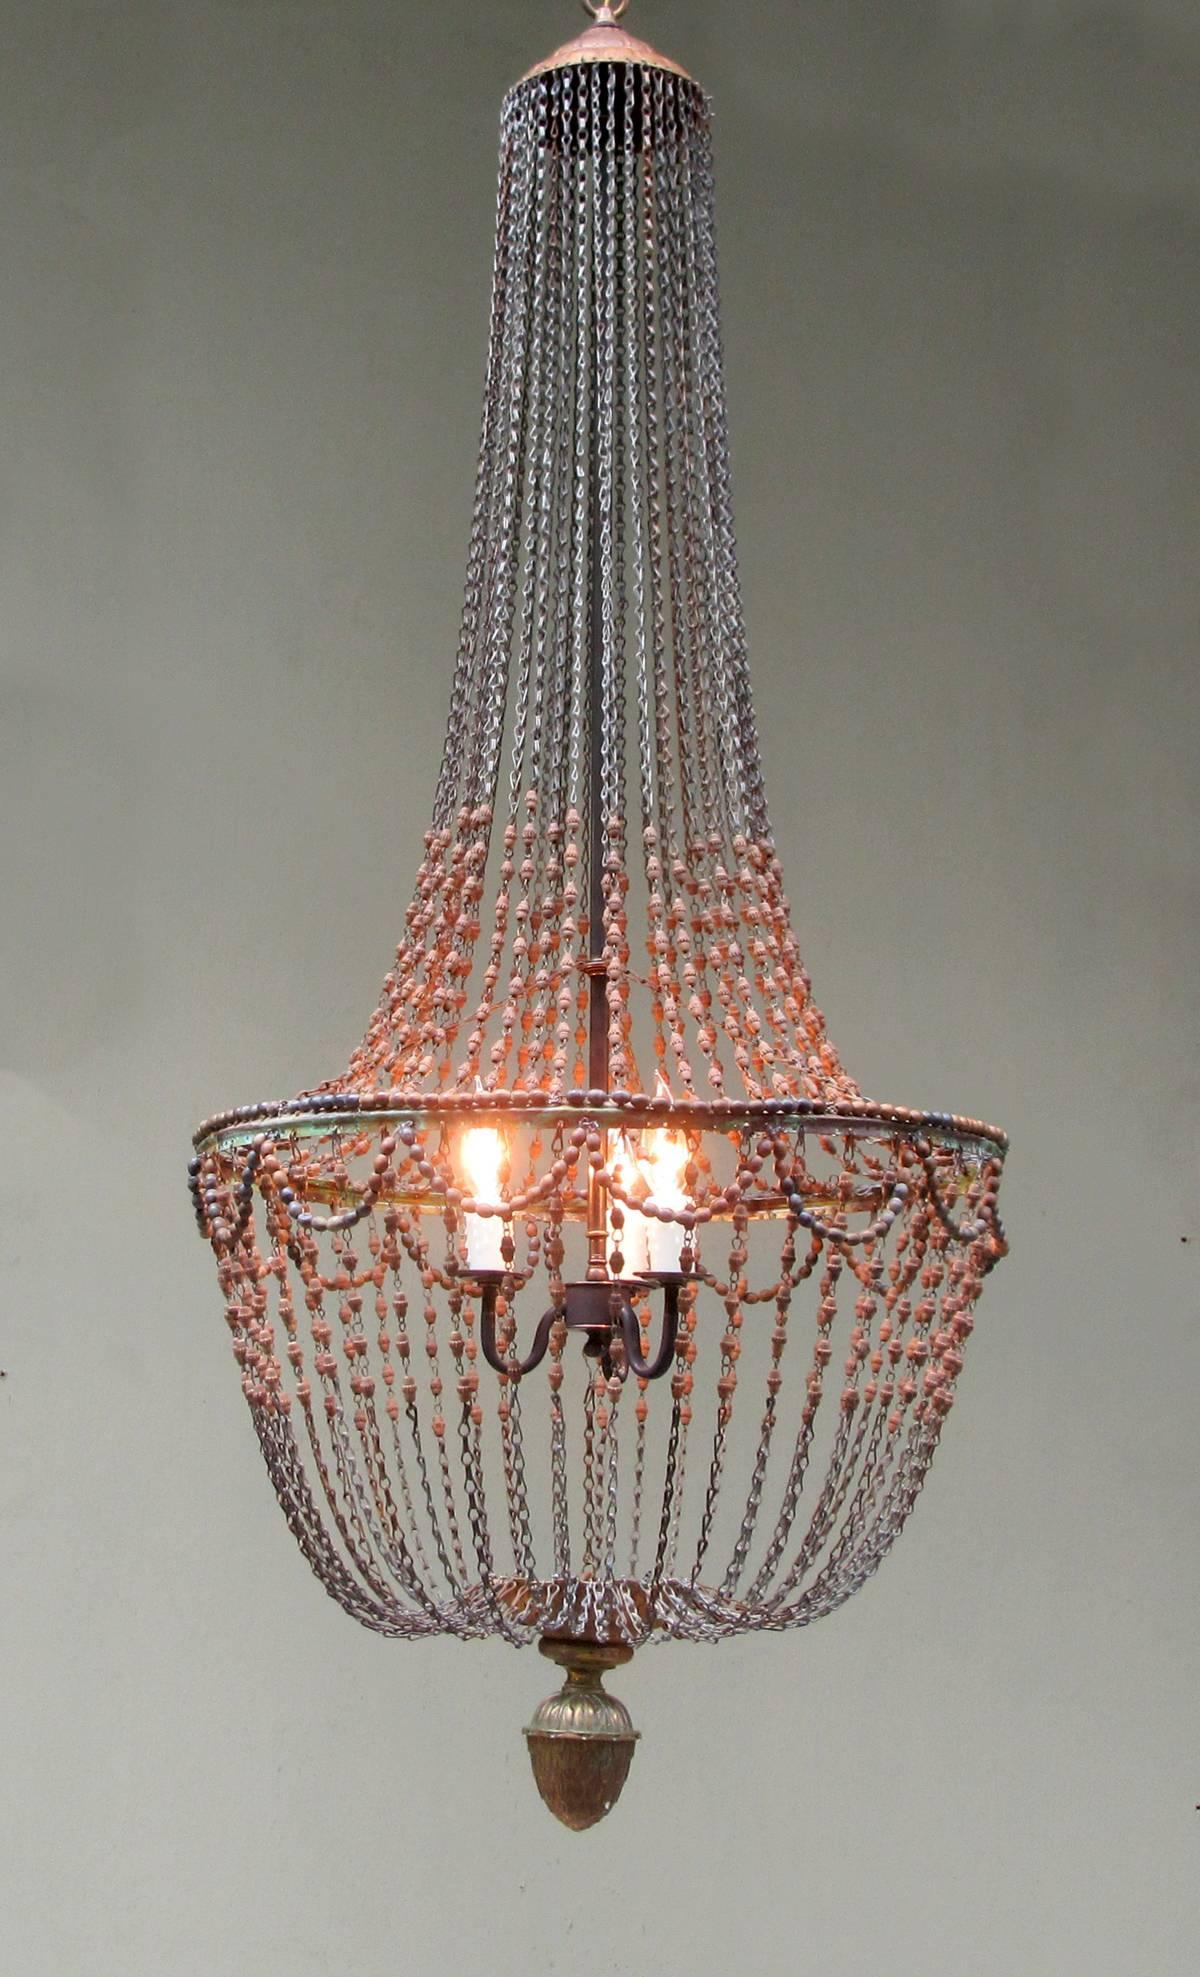 Brass Early 20th Century Italian Empire Hand-Carved Wood Bead Chandelier with Pinecone